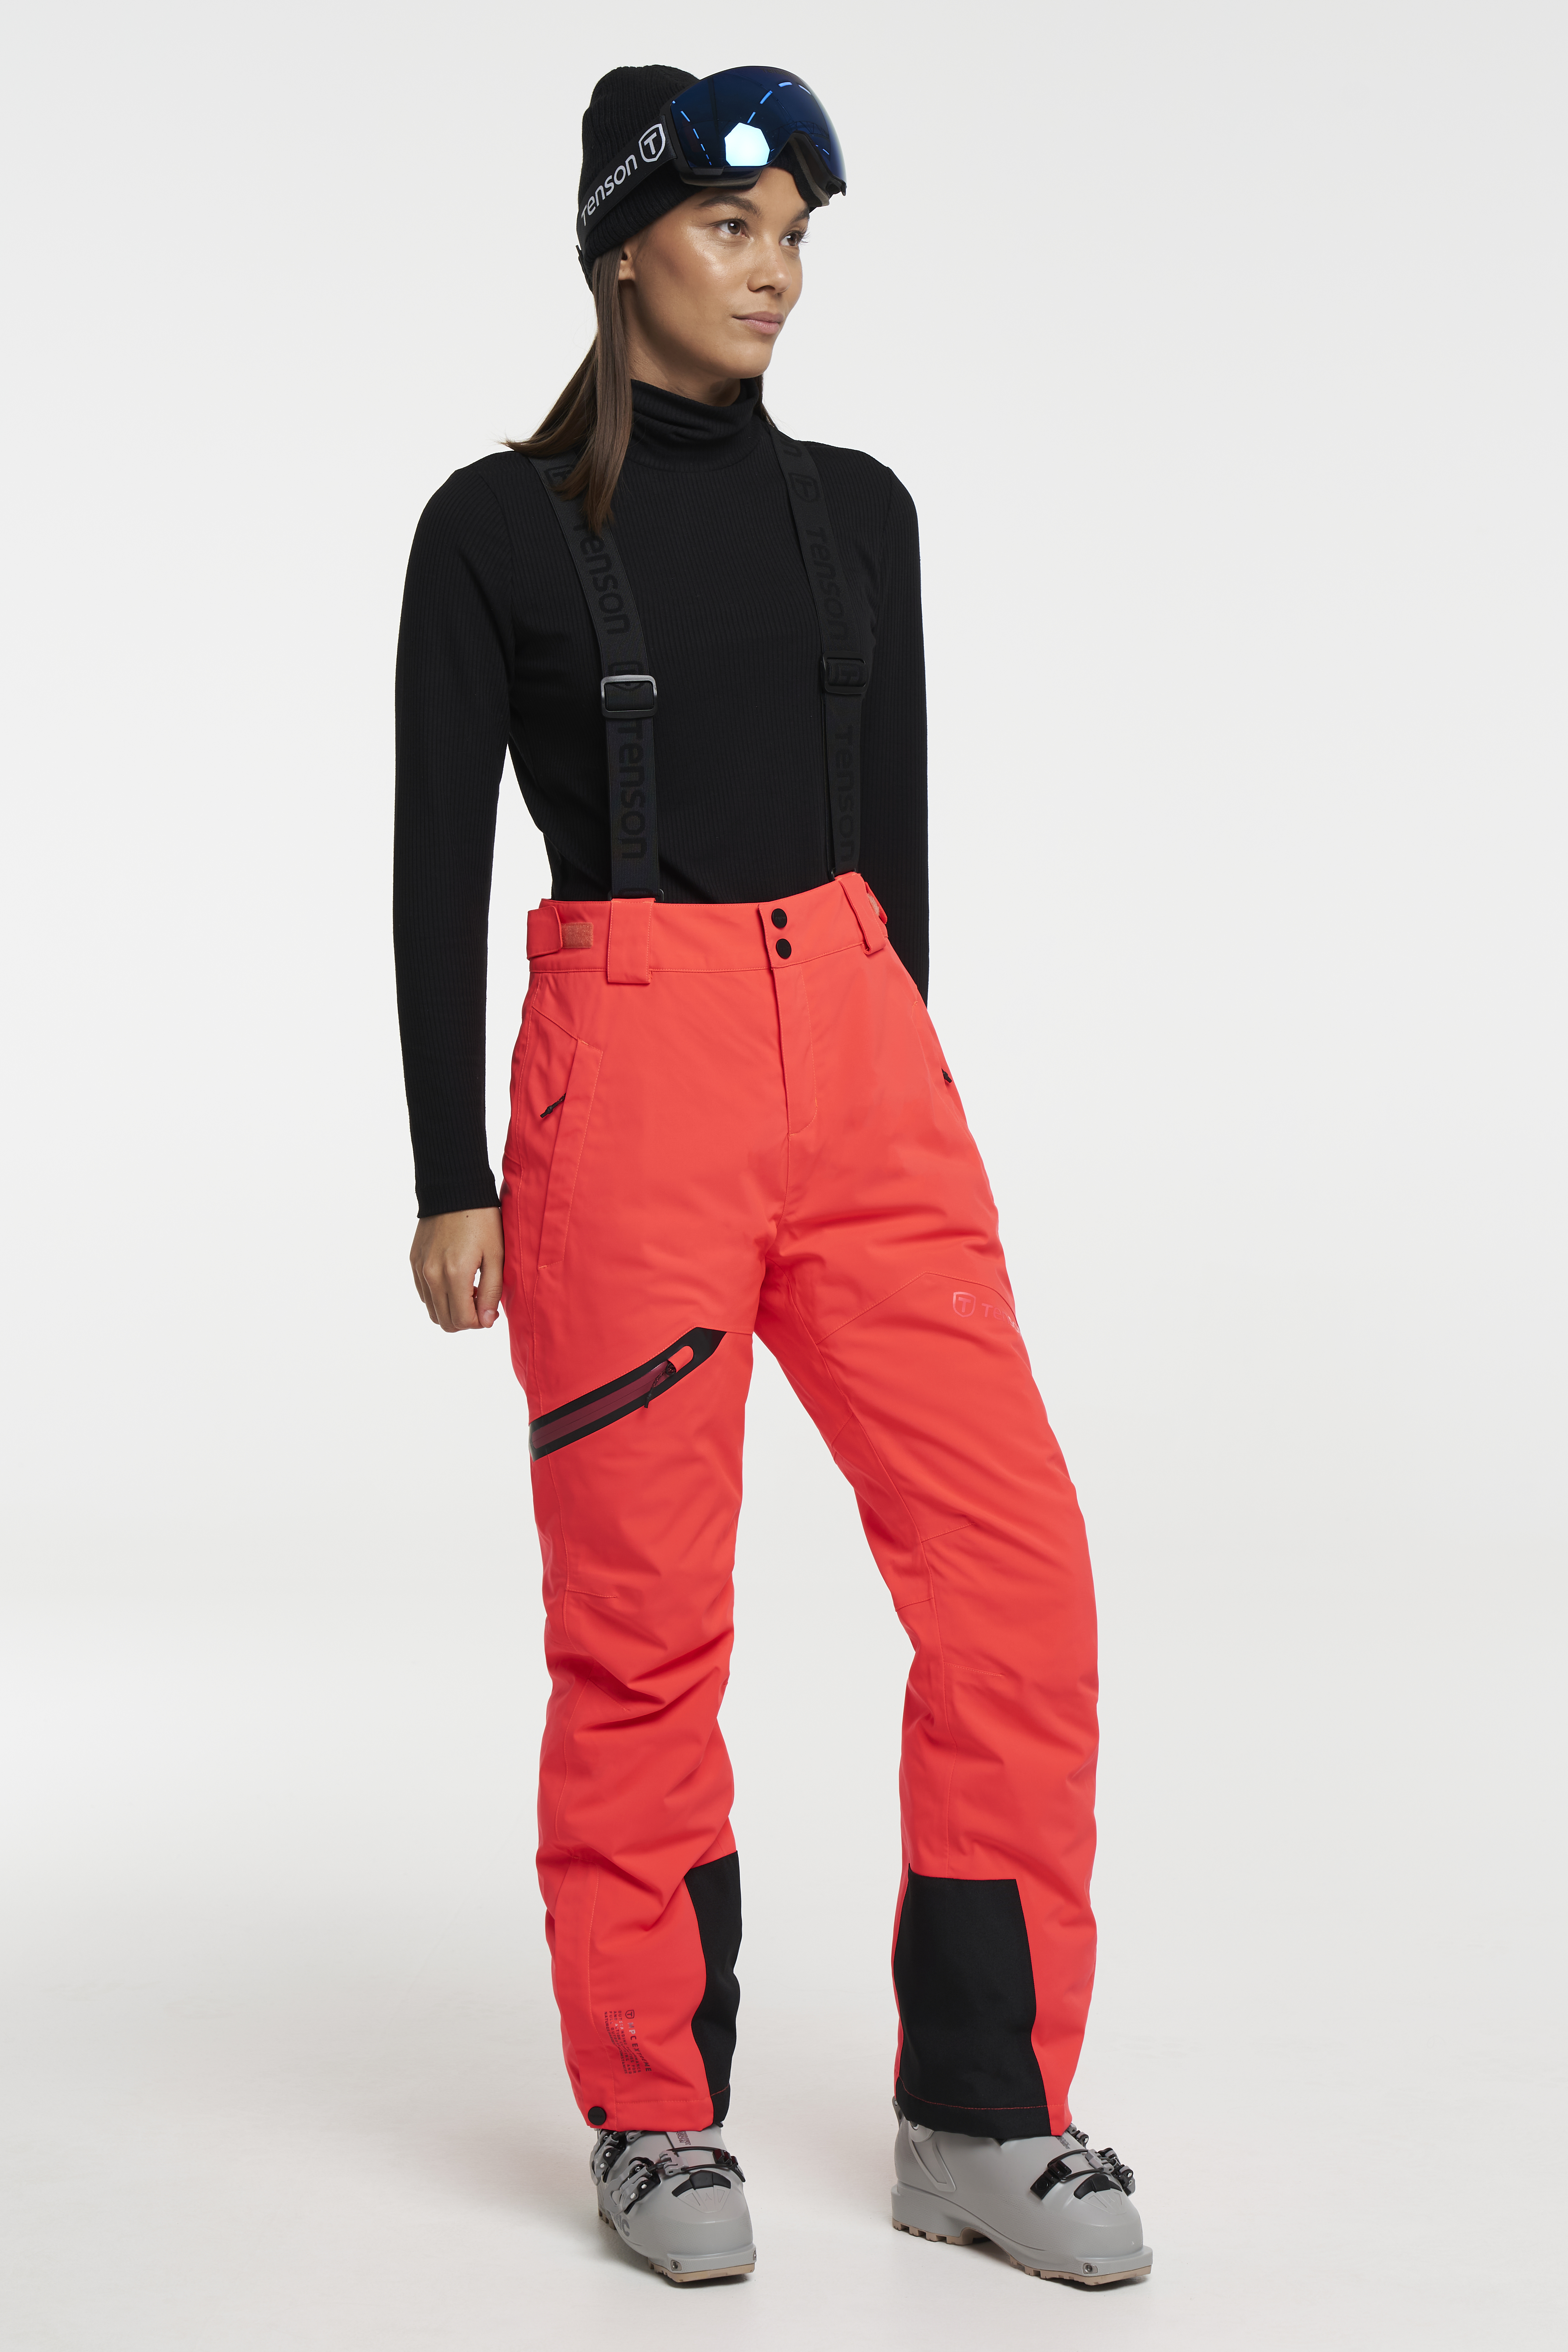 How To Choose Ski Pants  Snow Bibs  our Pro Tips  Quiksilver